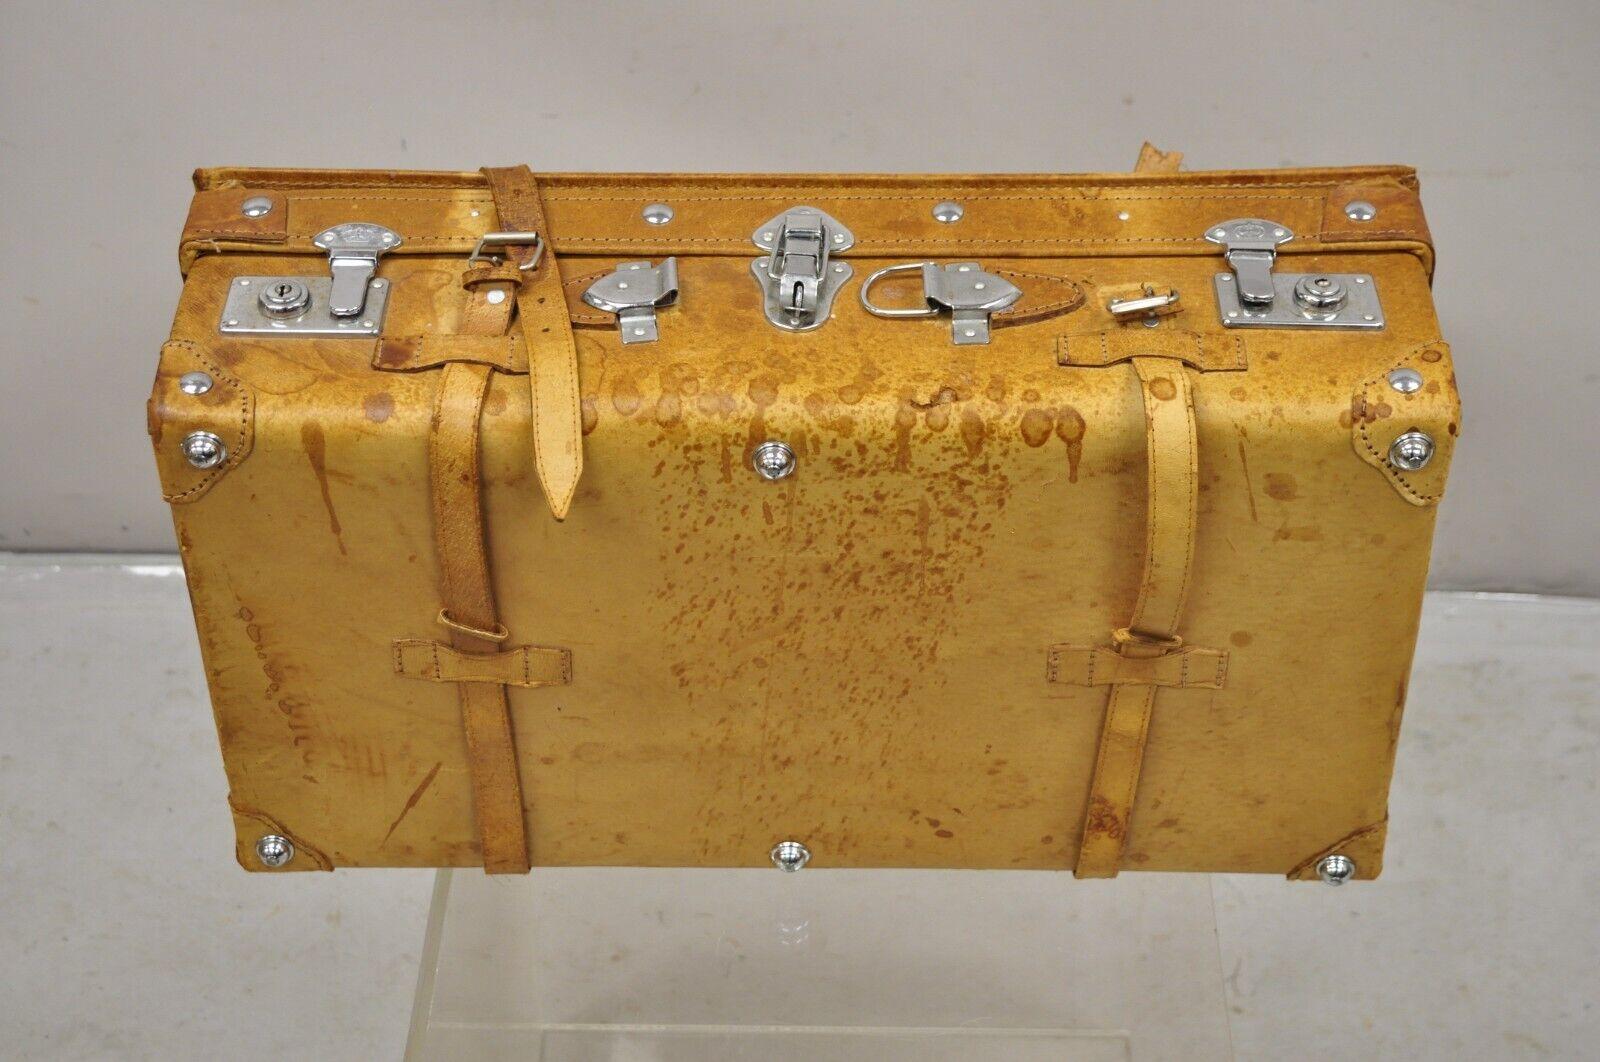 Vintage Brown Caramel Tan Leather Suitcase Luggage with Chrome Hardware 5